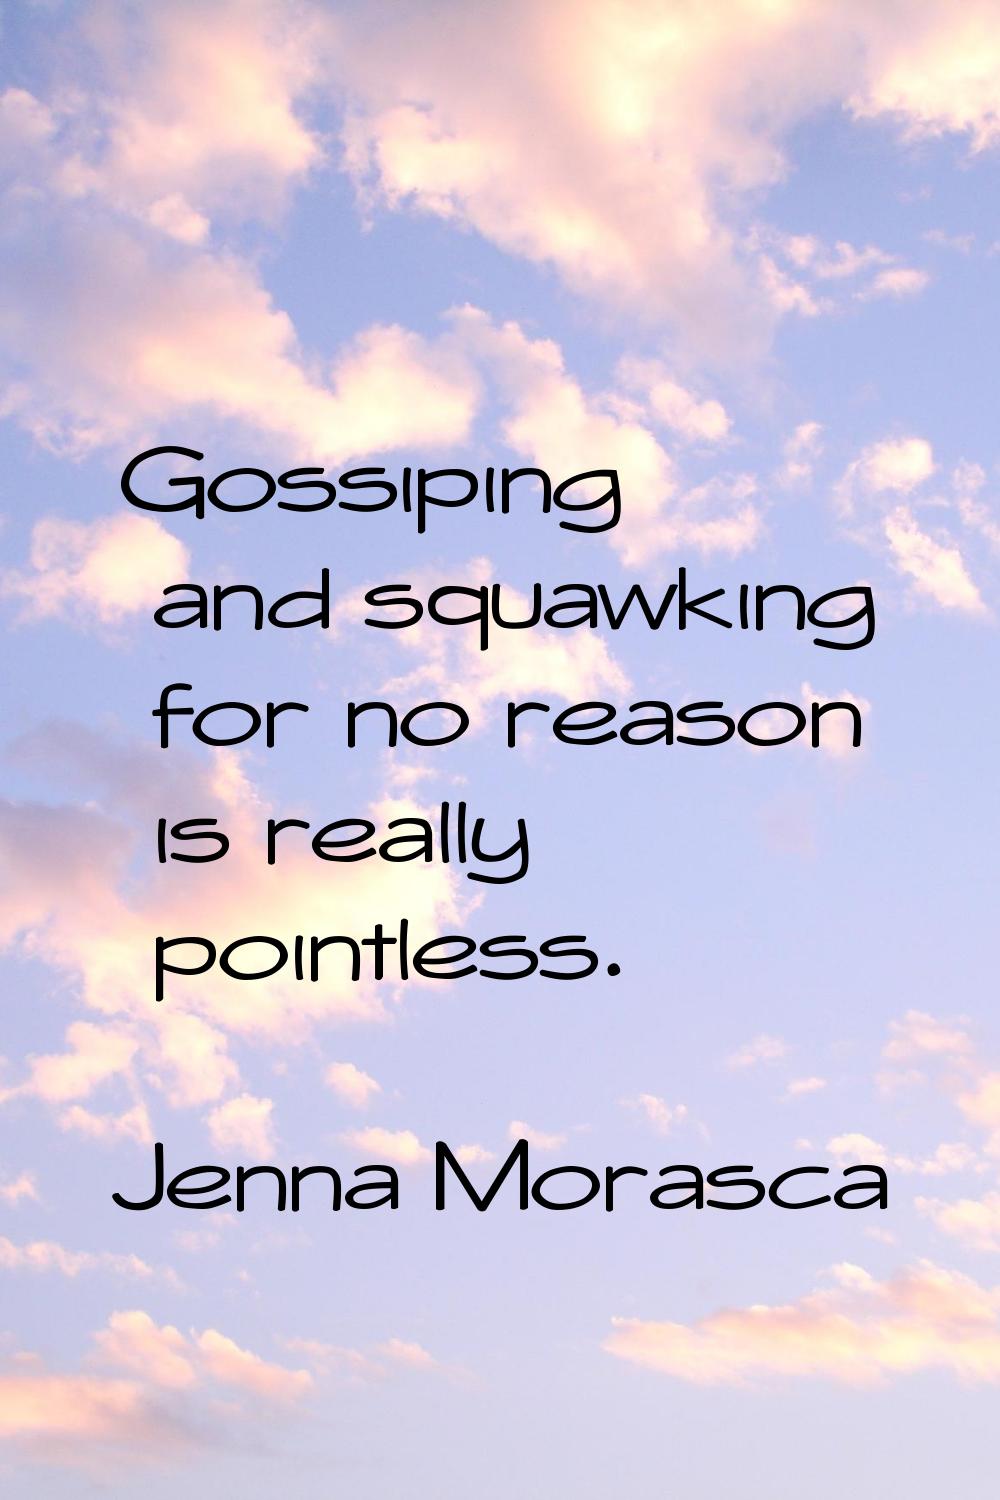 Gossiping and squawking for no reason is really pointless.